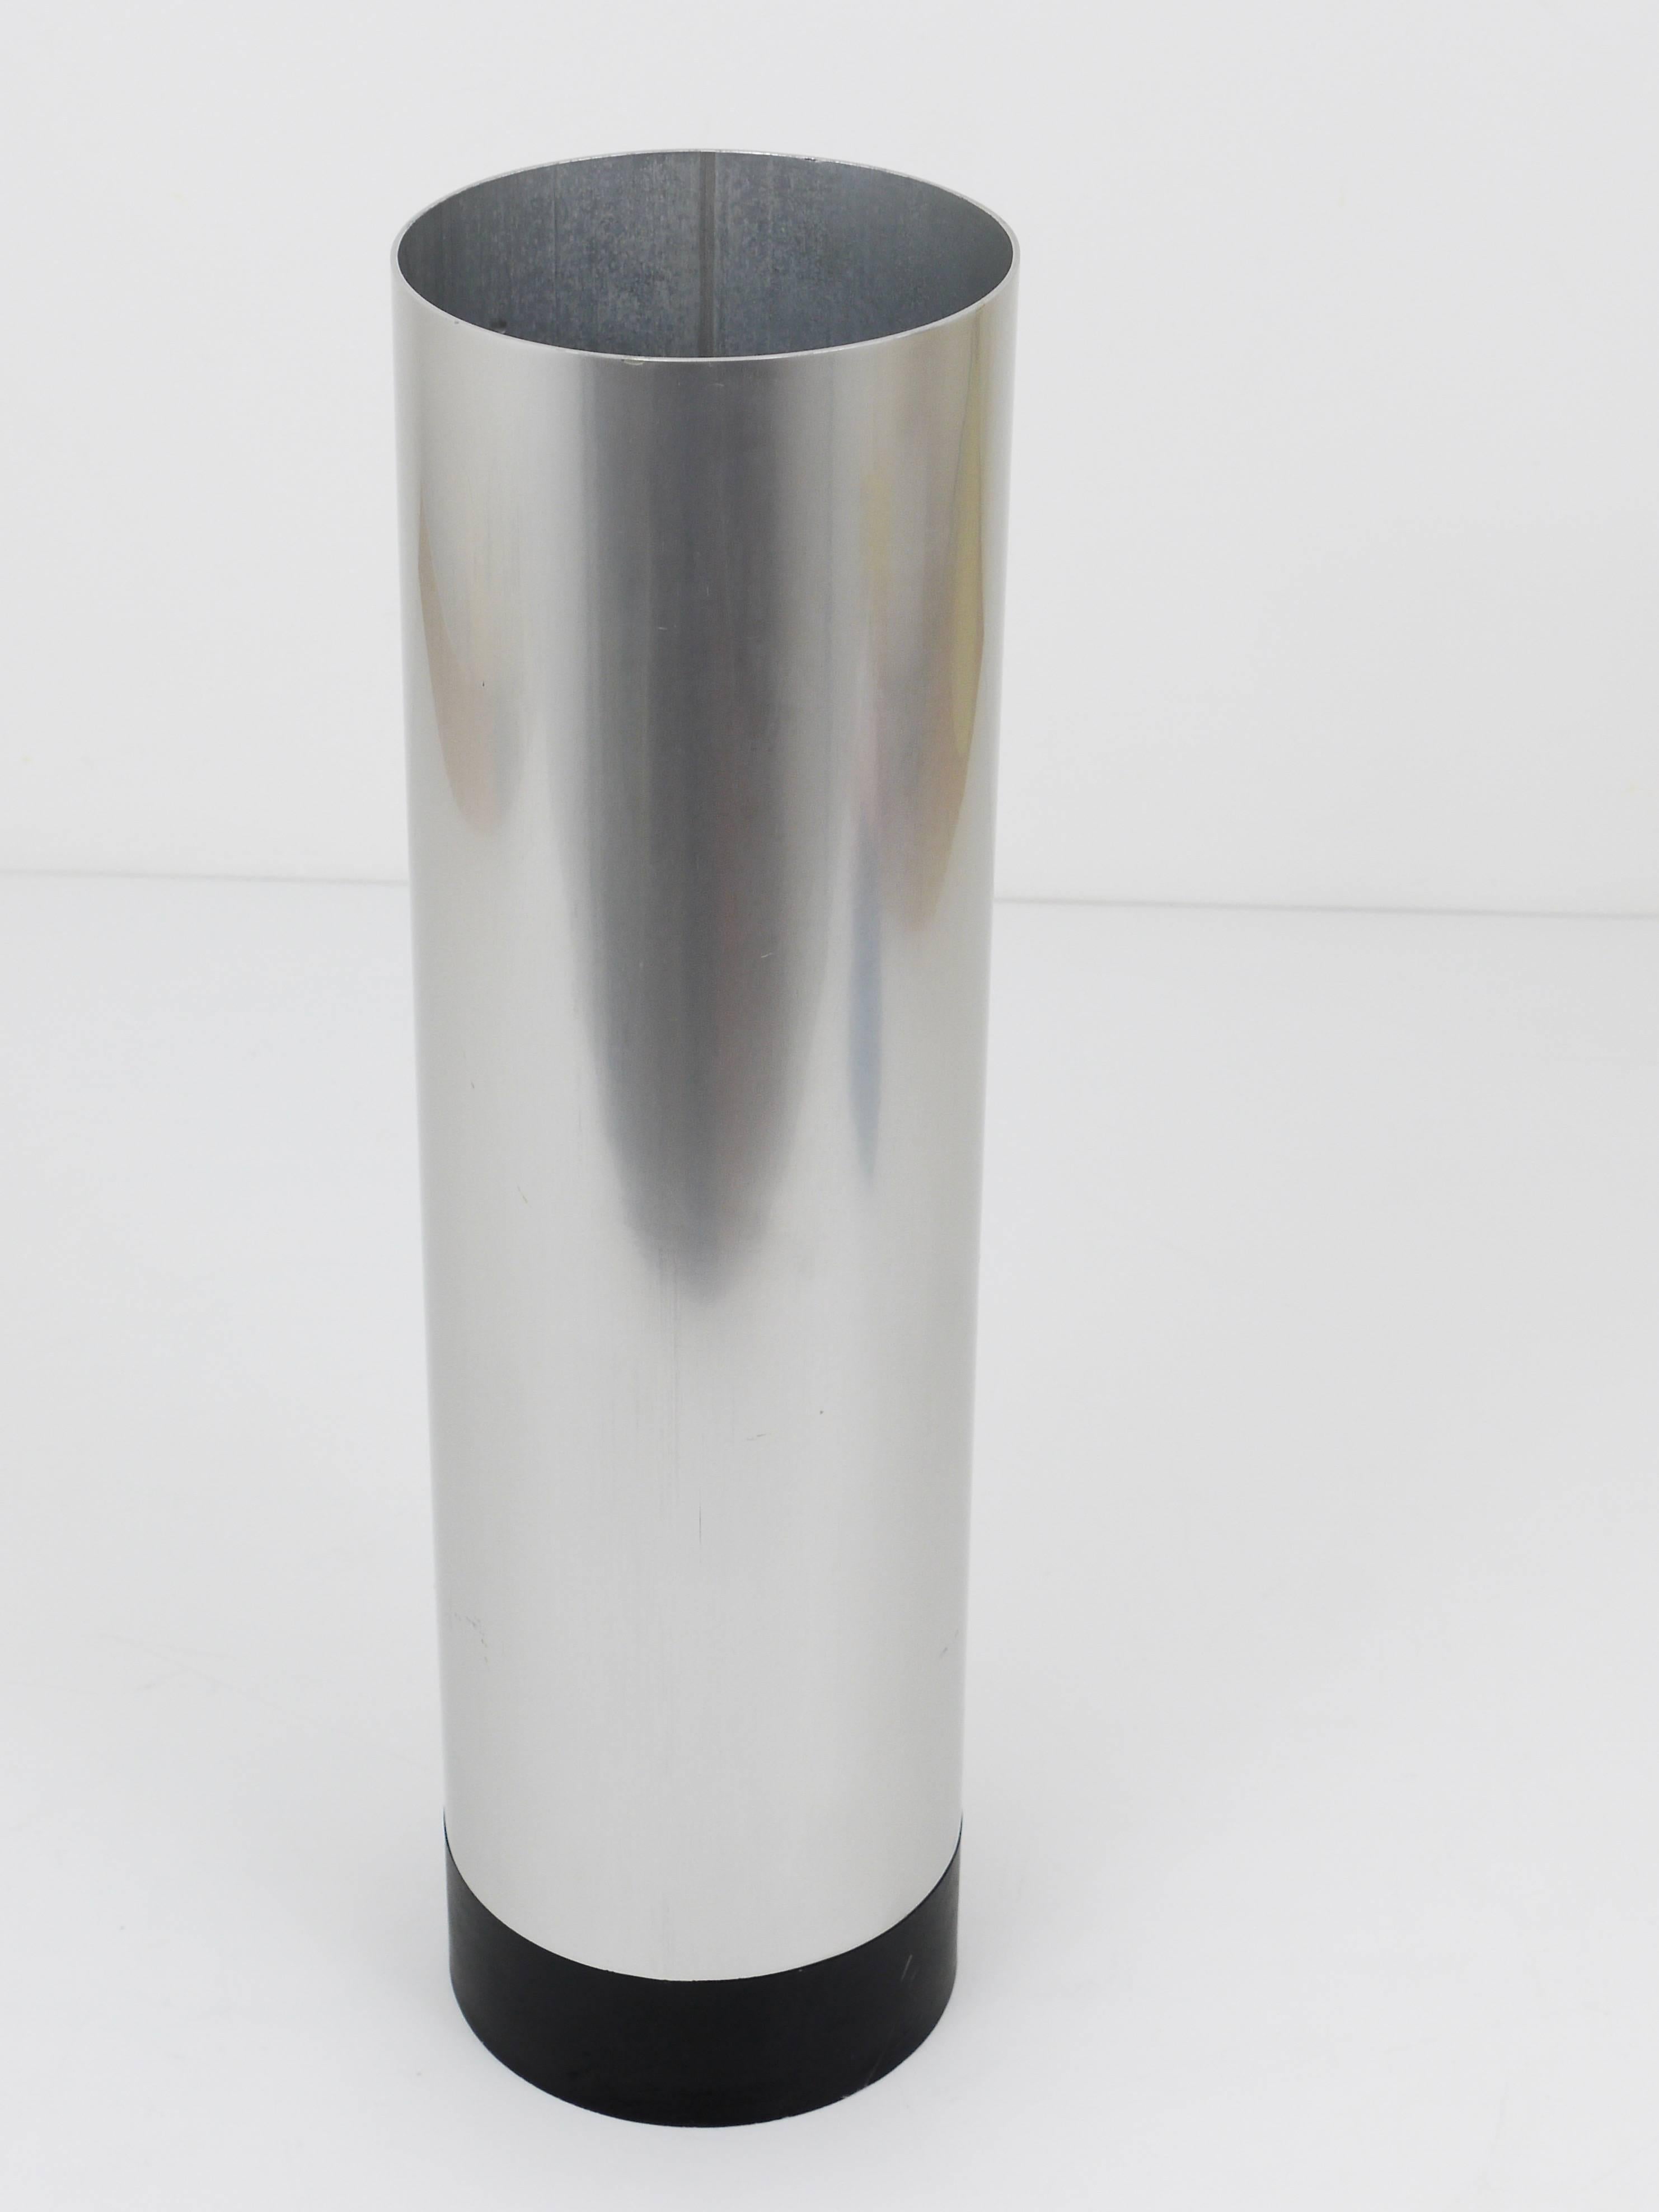 A beautiful cylindric Mid-Century umbrella stand, made of aluminum with a solid black metal base from Austria, 1960s, designed by Franz Hagenauer, executed by Werkstätte Hagenauer, WHW. In very good condition with nice patina. From the estate of